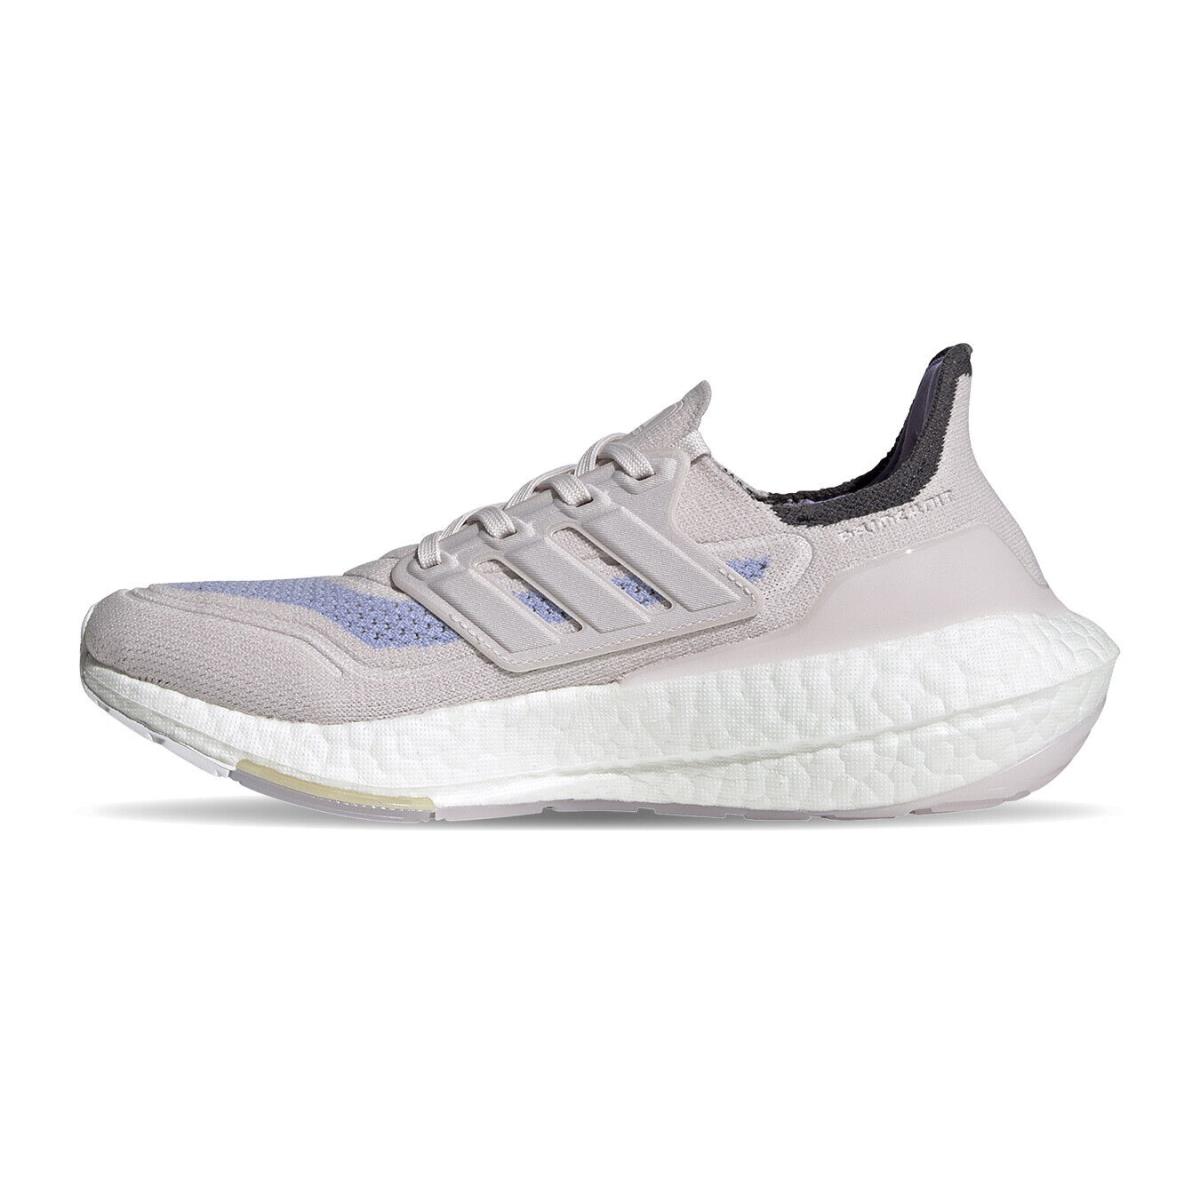 Adidas Ultraboost 21 Running Shoes `orchid Tint` Women`s S23837 Size 7 - Purple